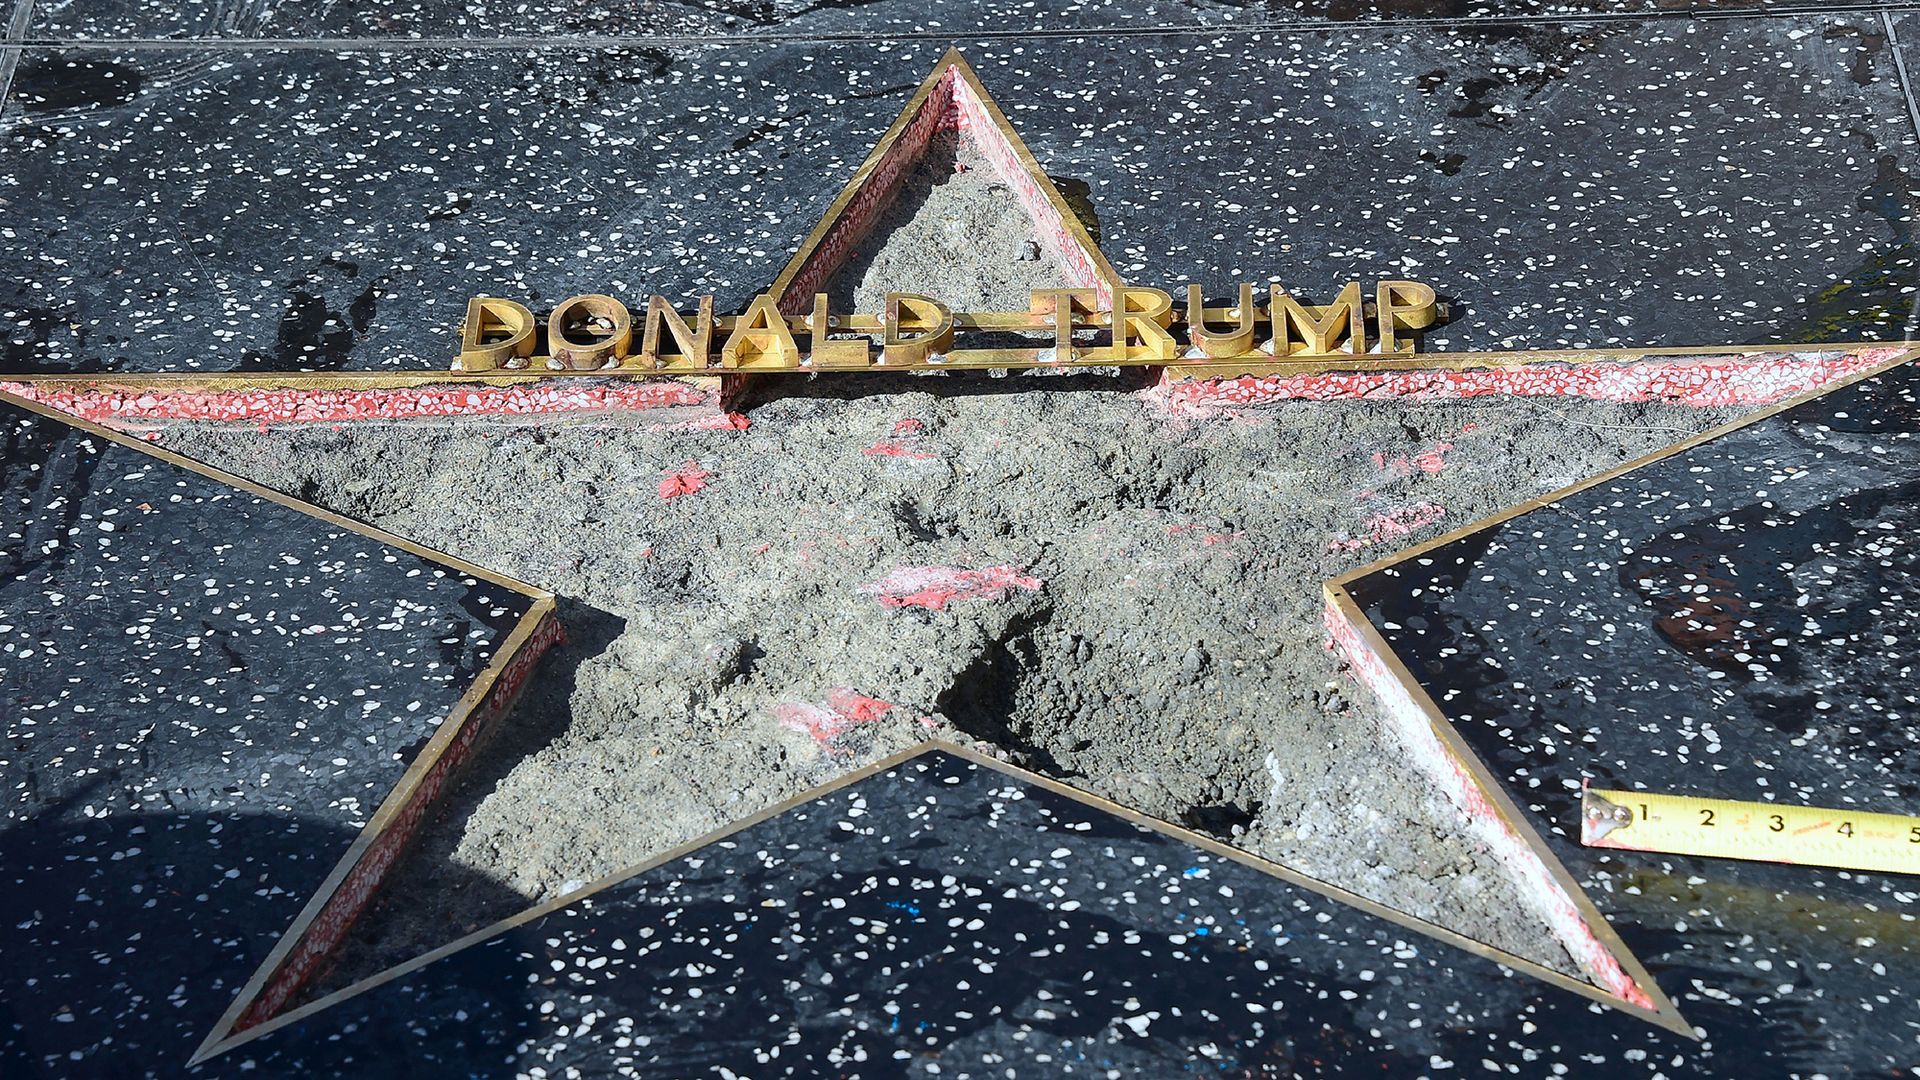 Vandals attempted on the Trump star many times